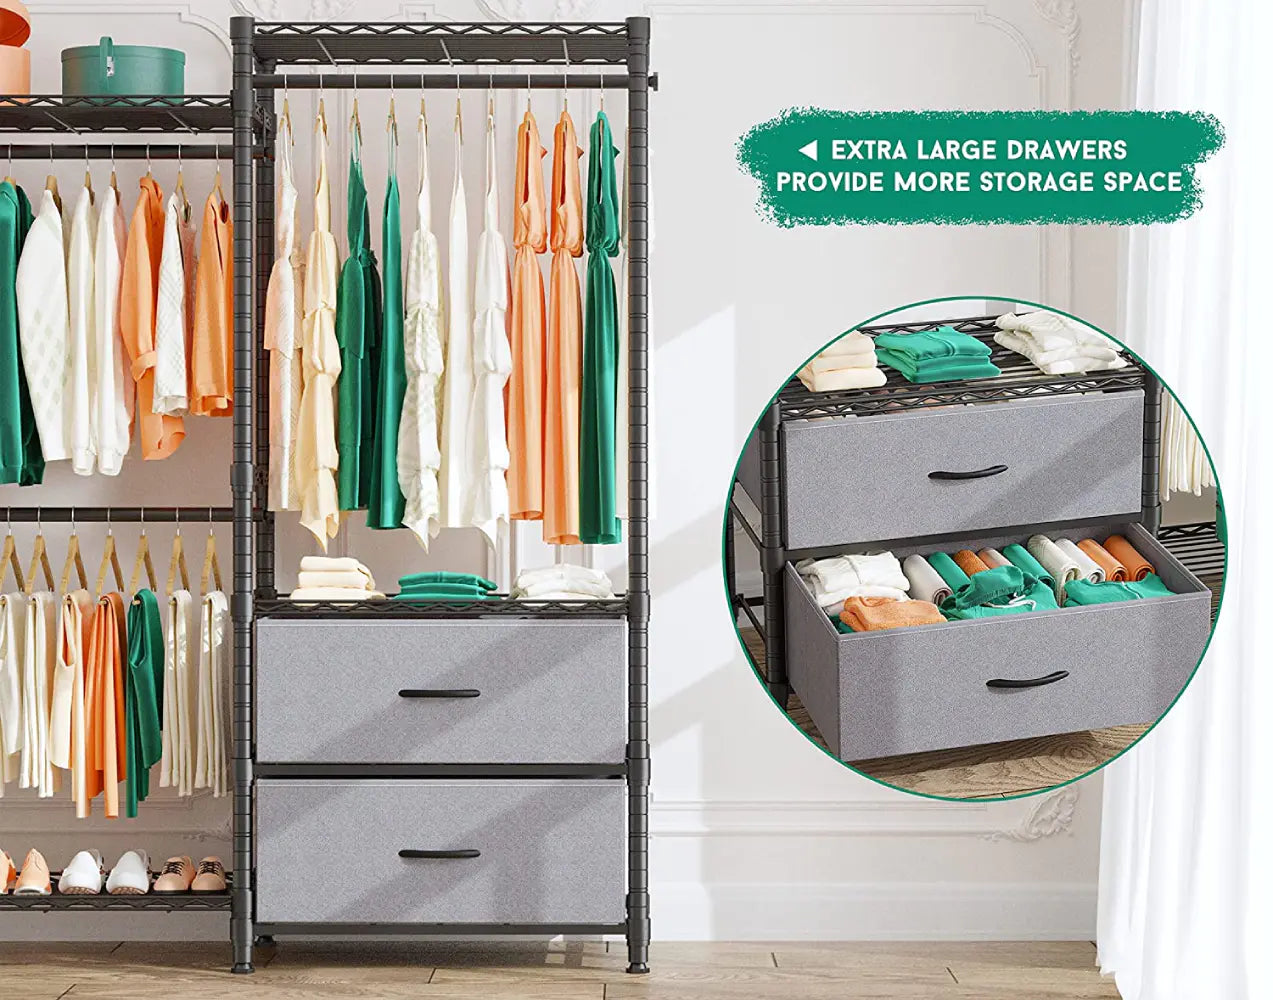 REIBII wire clothing rack heavy duty comes with 2 large drawers for  more storage spaces